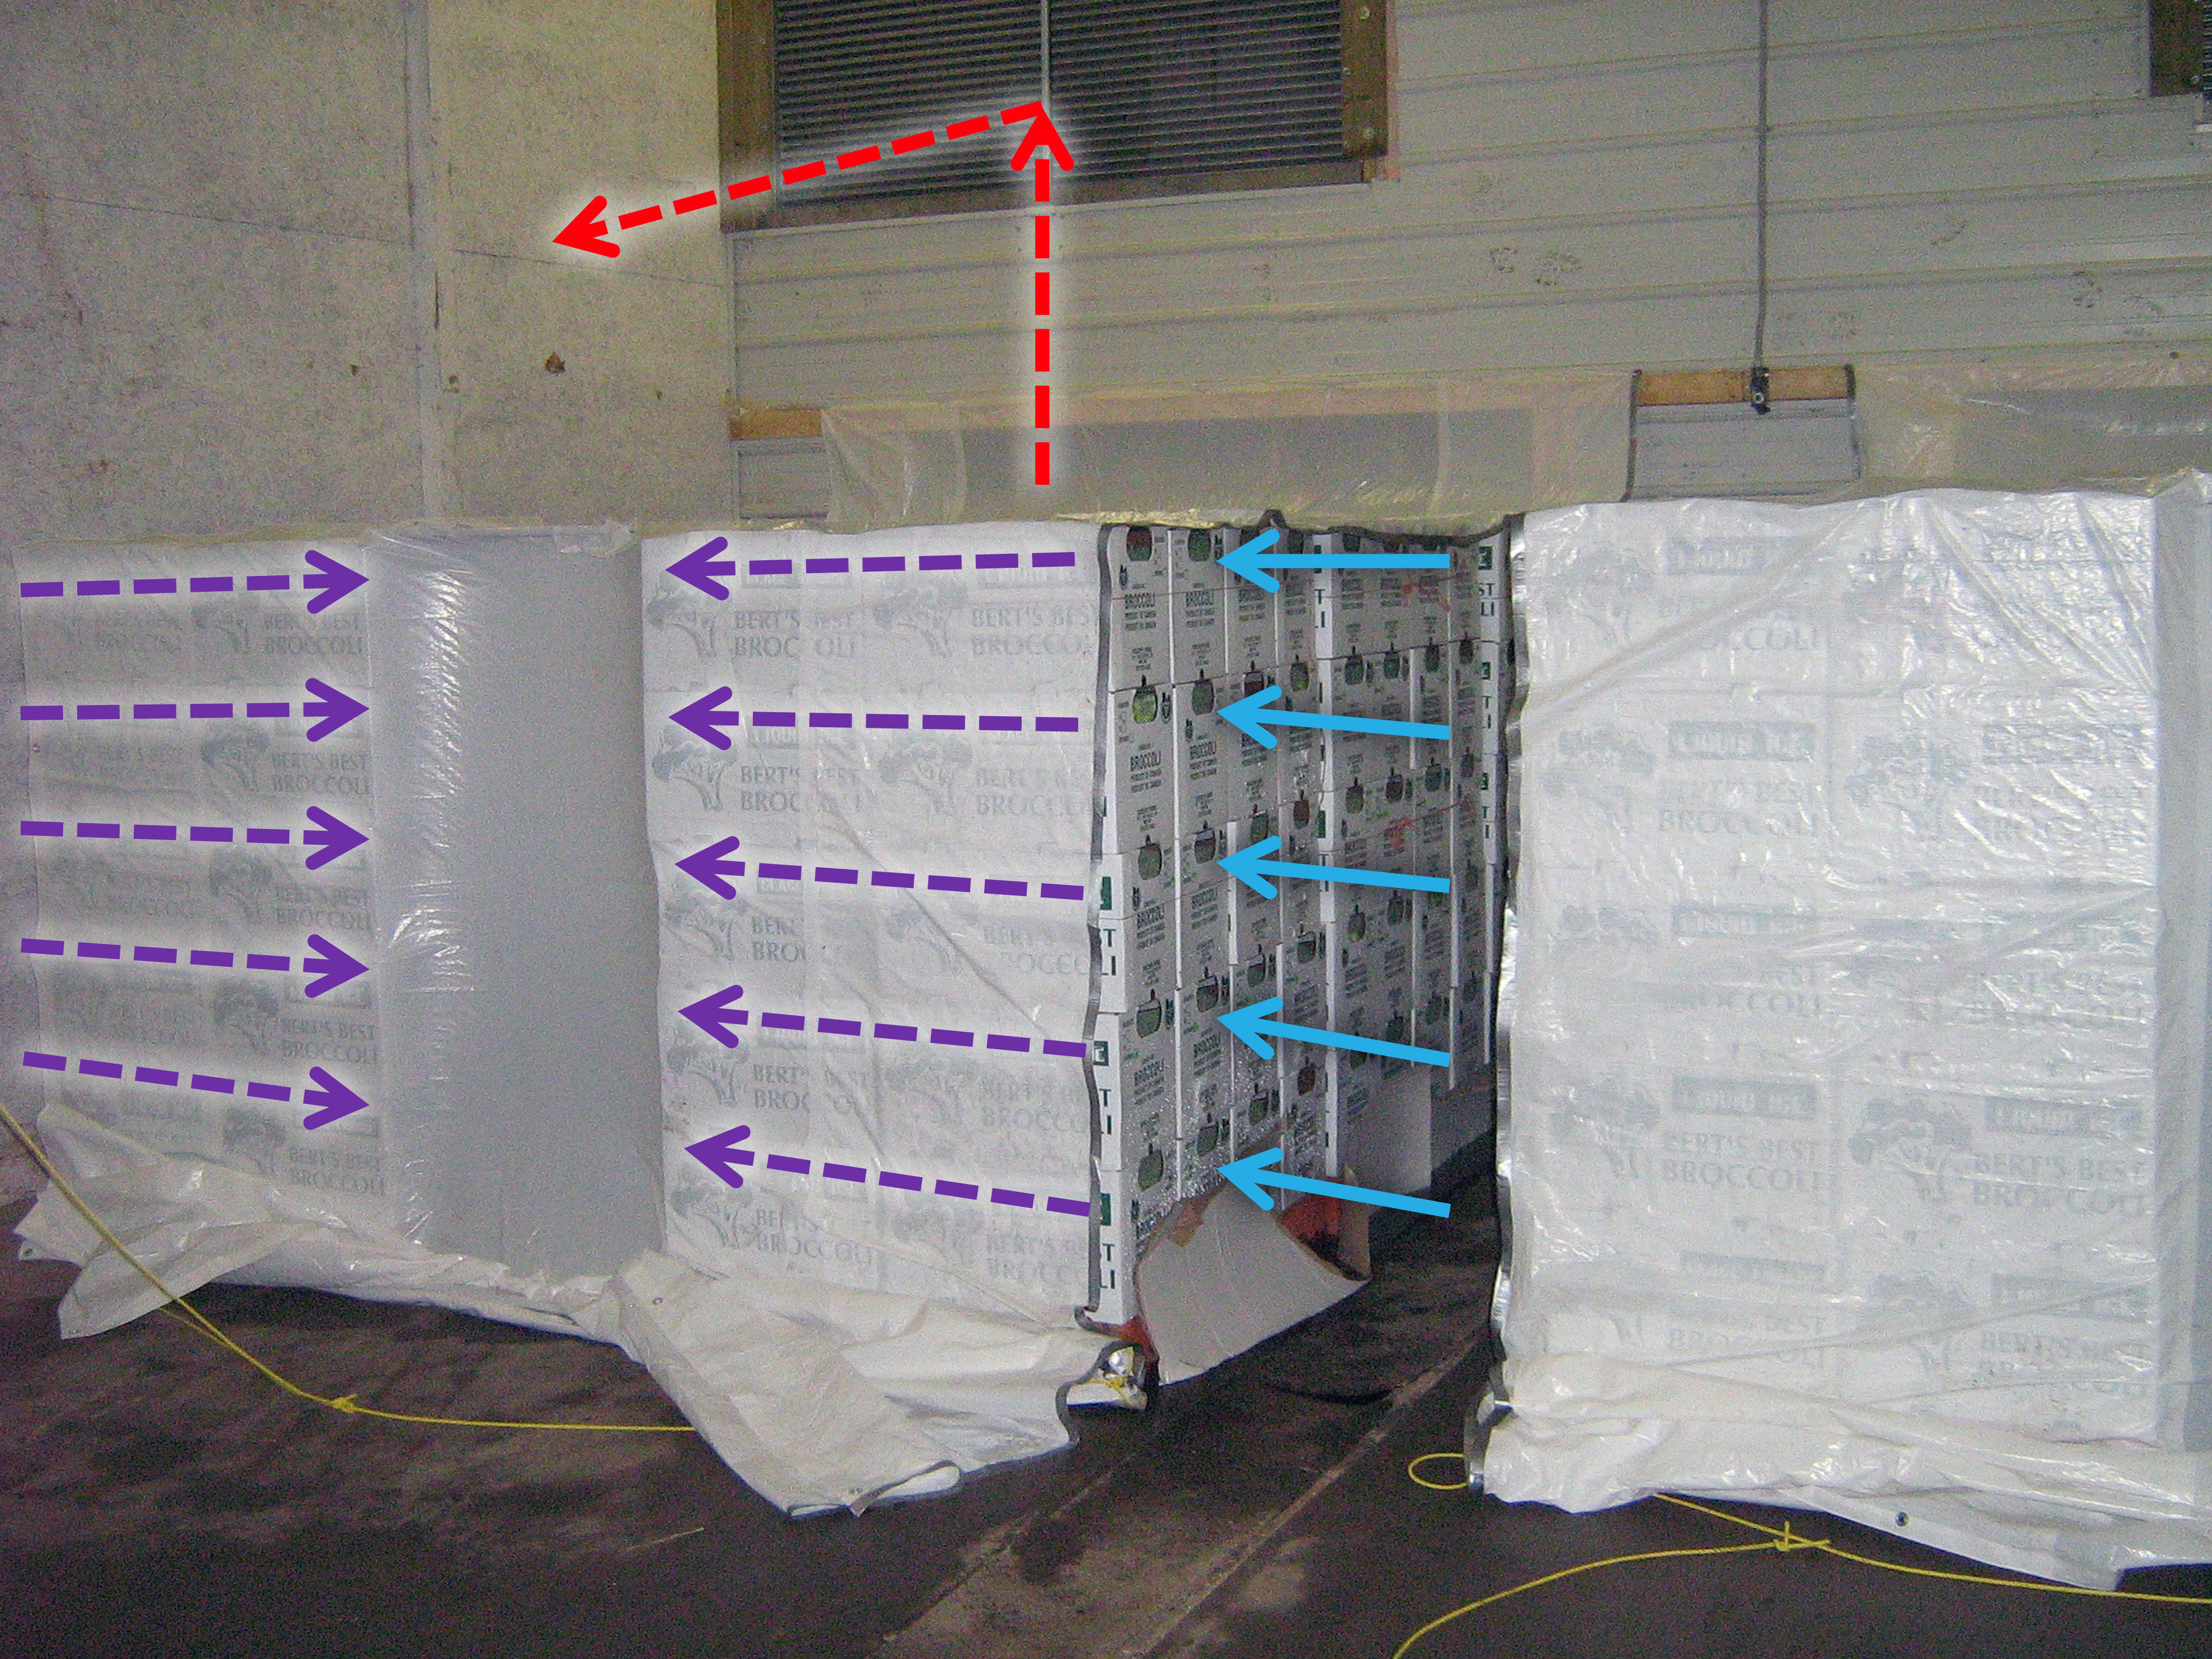 This tunnel horizontal airflow system has high-capacity fans inside a plenum (located behind the pallets) that pull refrigerated air (blue arrows) from the room horizontally through produce boxes. Warmed air (purple then red arrows) then travels through a “tunnel” created between the pallets and into the plenum, where it is directed back into the storage room (red arrows) towards the evaporator coils to be re-cooled. Pallets are cooled in pairs. Plastic sheeting sucks tightly against the boxes and tunnel. Sheeting is swung into place with cords attached to the ceiling.